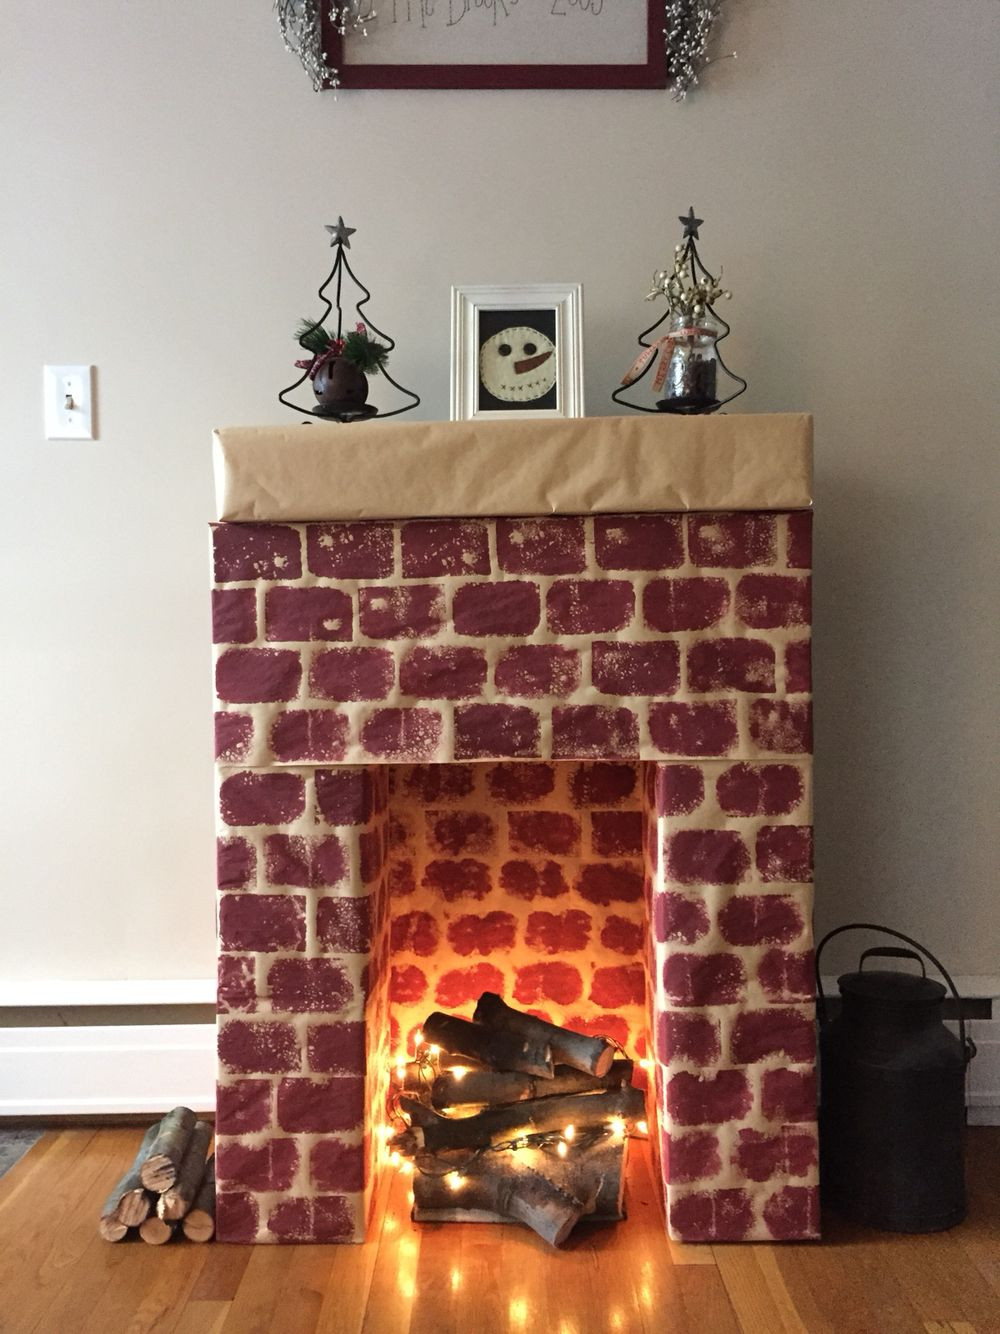 DIY Christmas Fireplace
 Cardboard fireplace with real wood and lights as fire